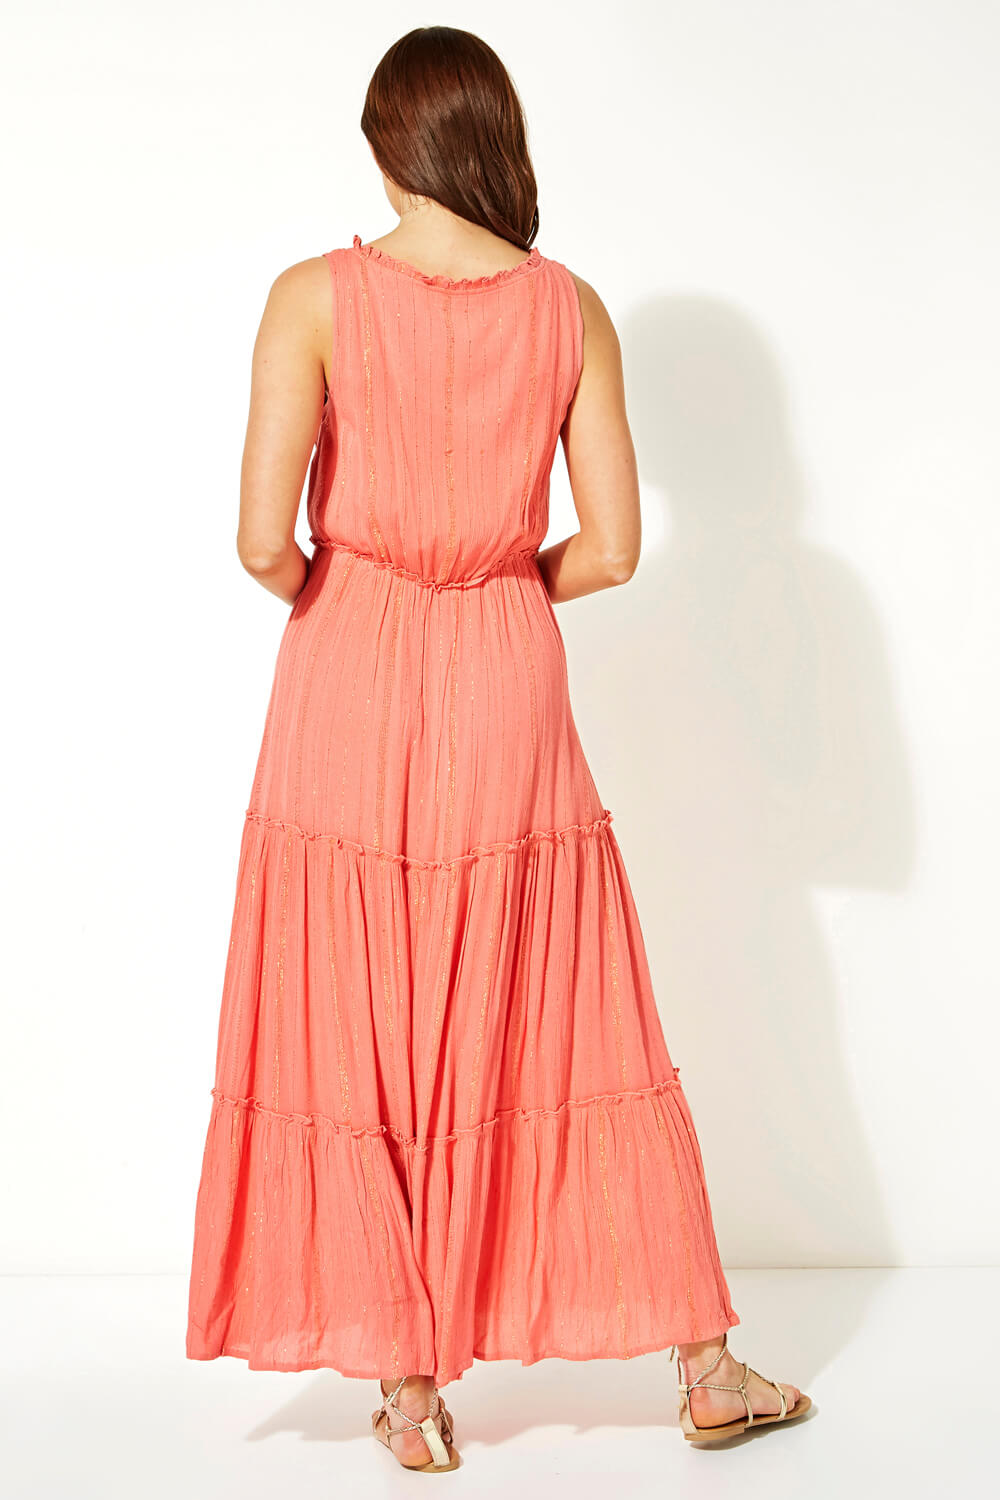 CORAL Tiered Tie Waist Maxi Dress , Image 2 of 4